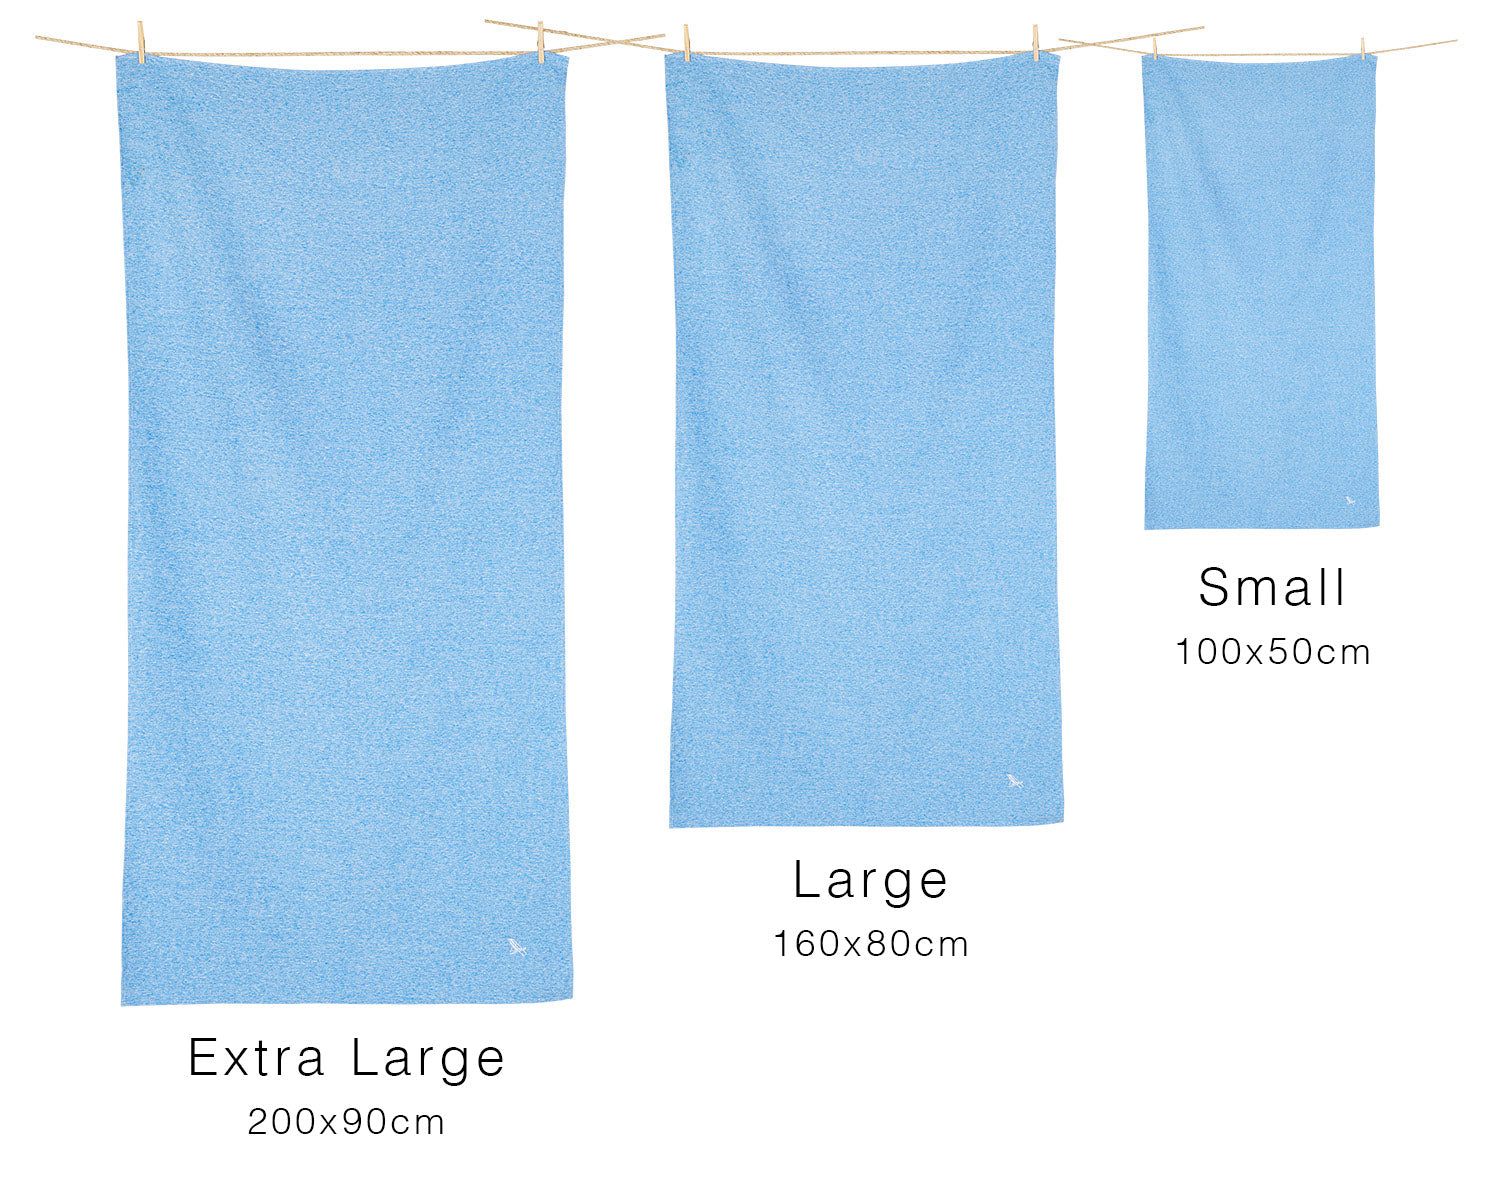 Sizes and dimensions of Dock & Bay towels